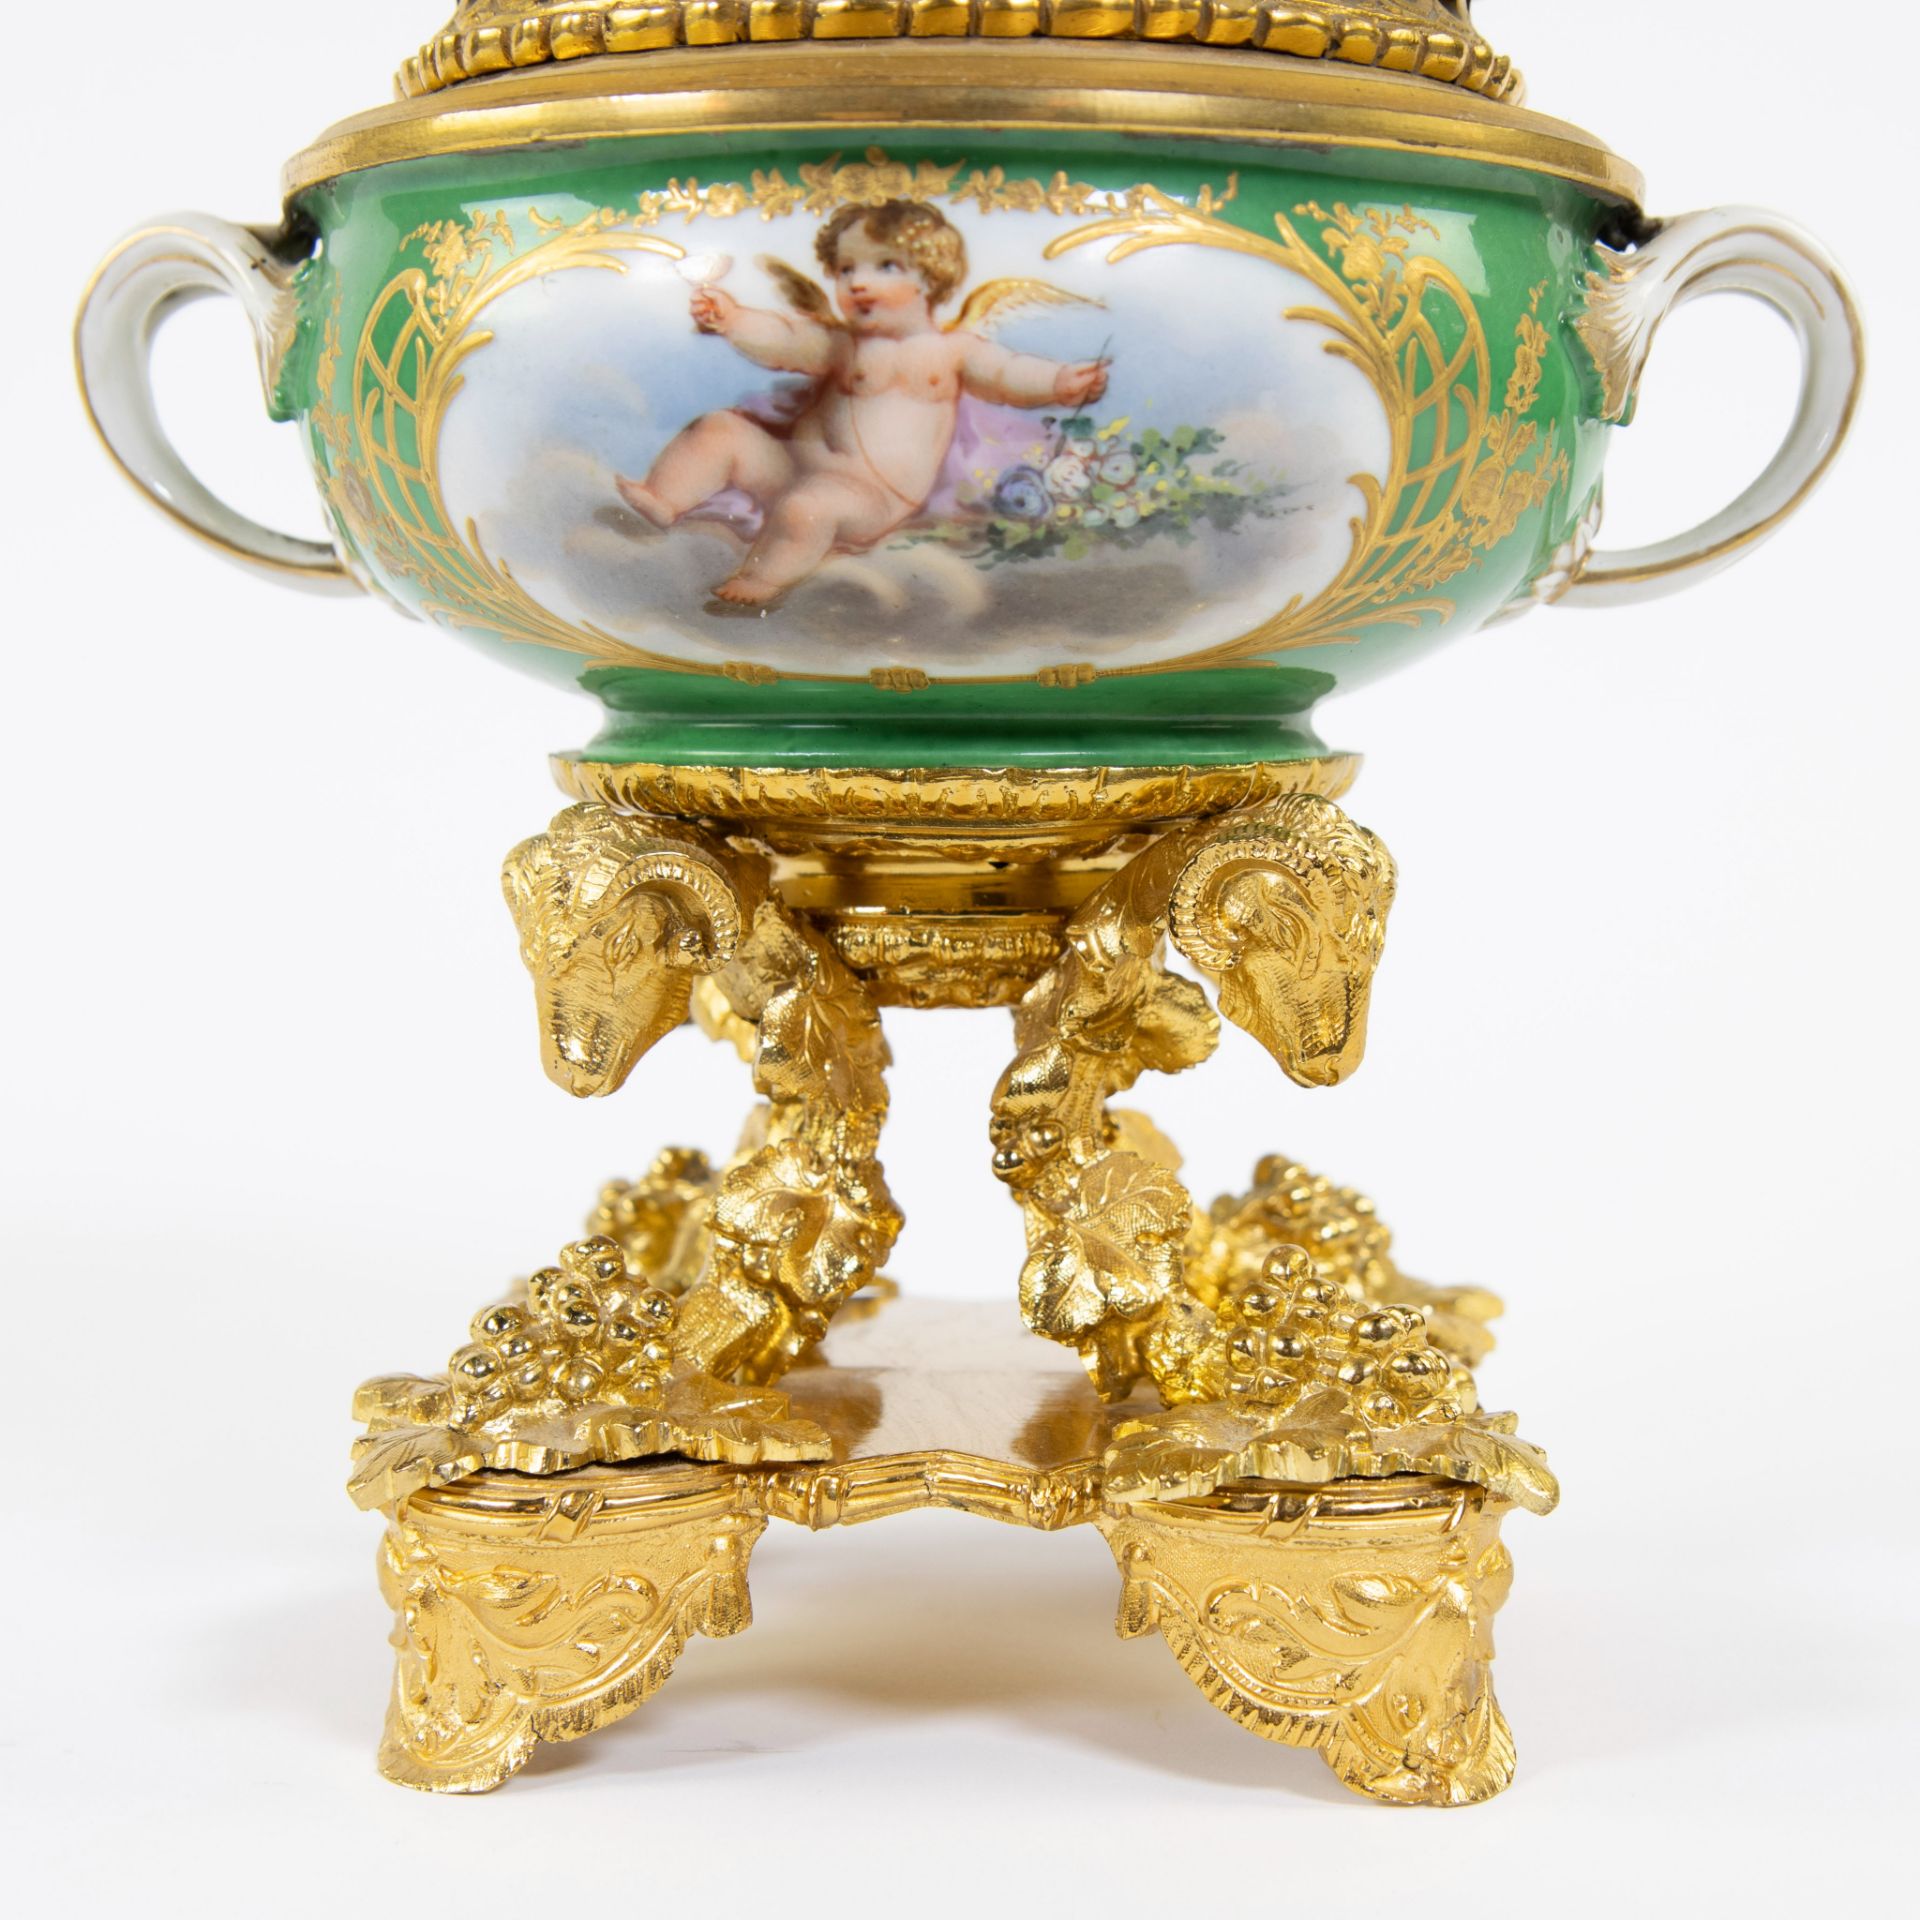 Porcelain table piece with gilt bronze fittings of rams' heads and bunches of grapes. Handpainted wi - Image 2 of 7